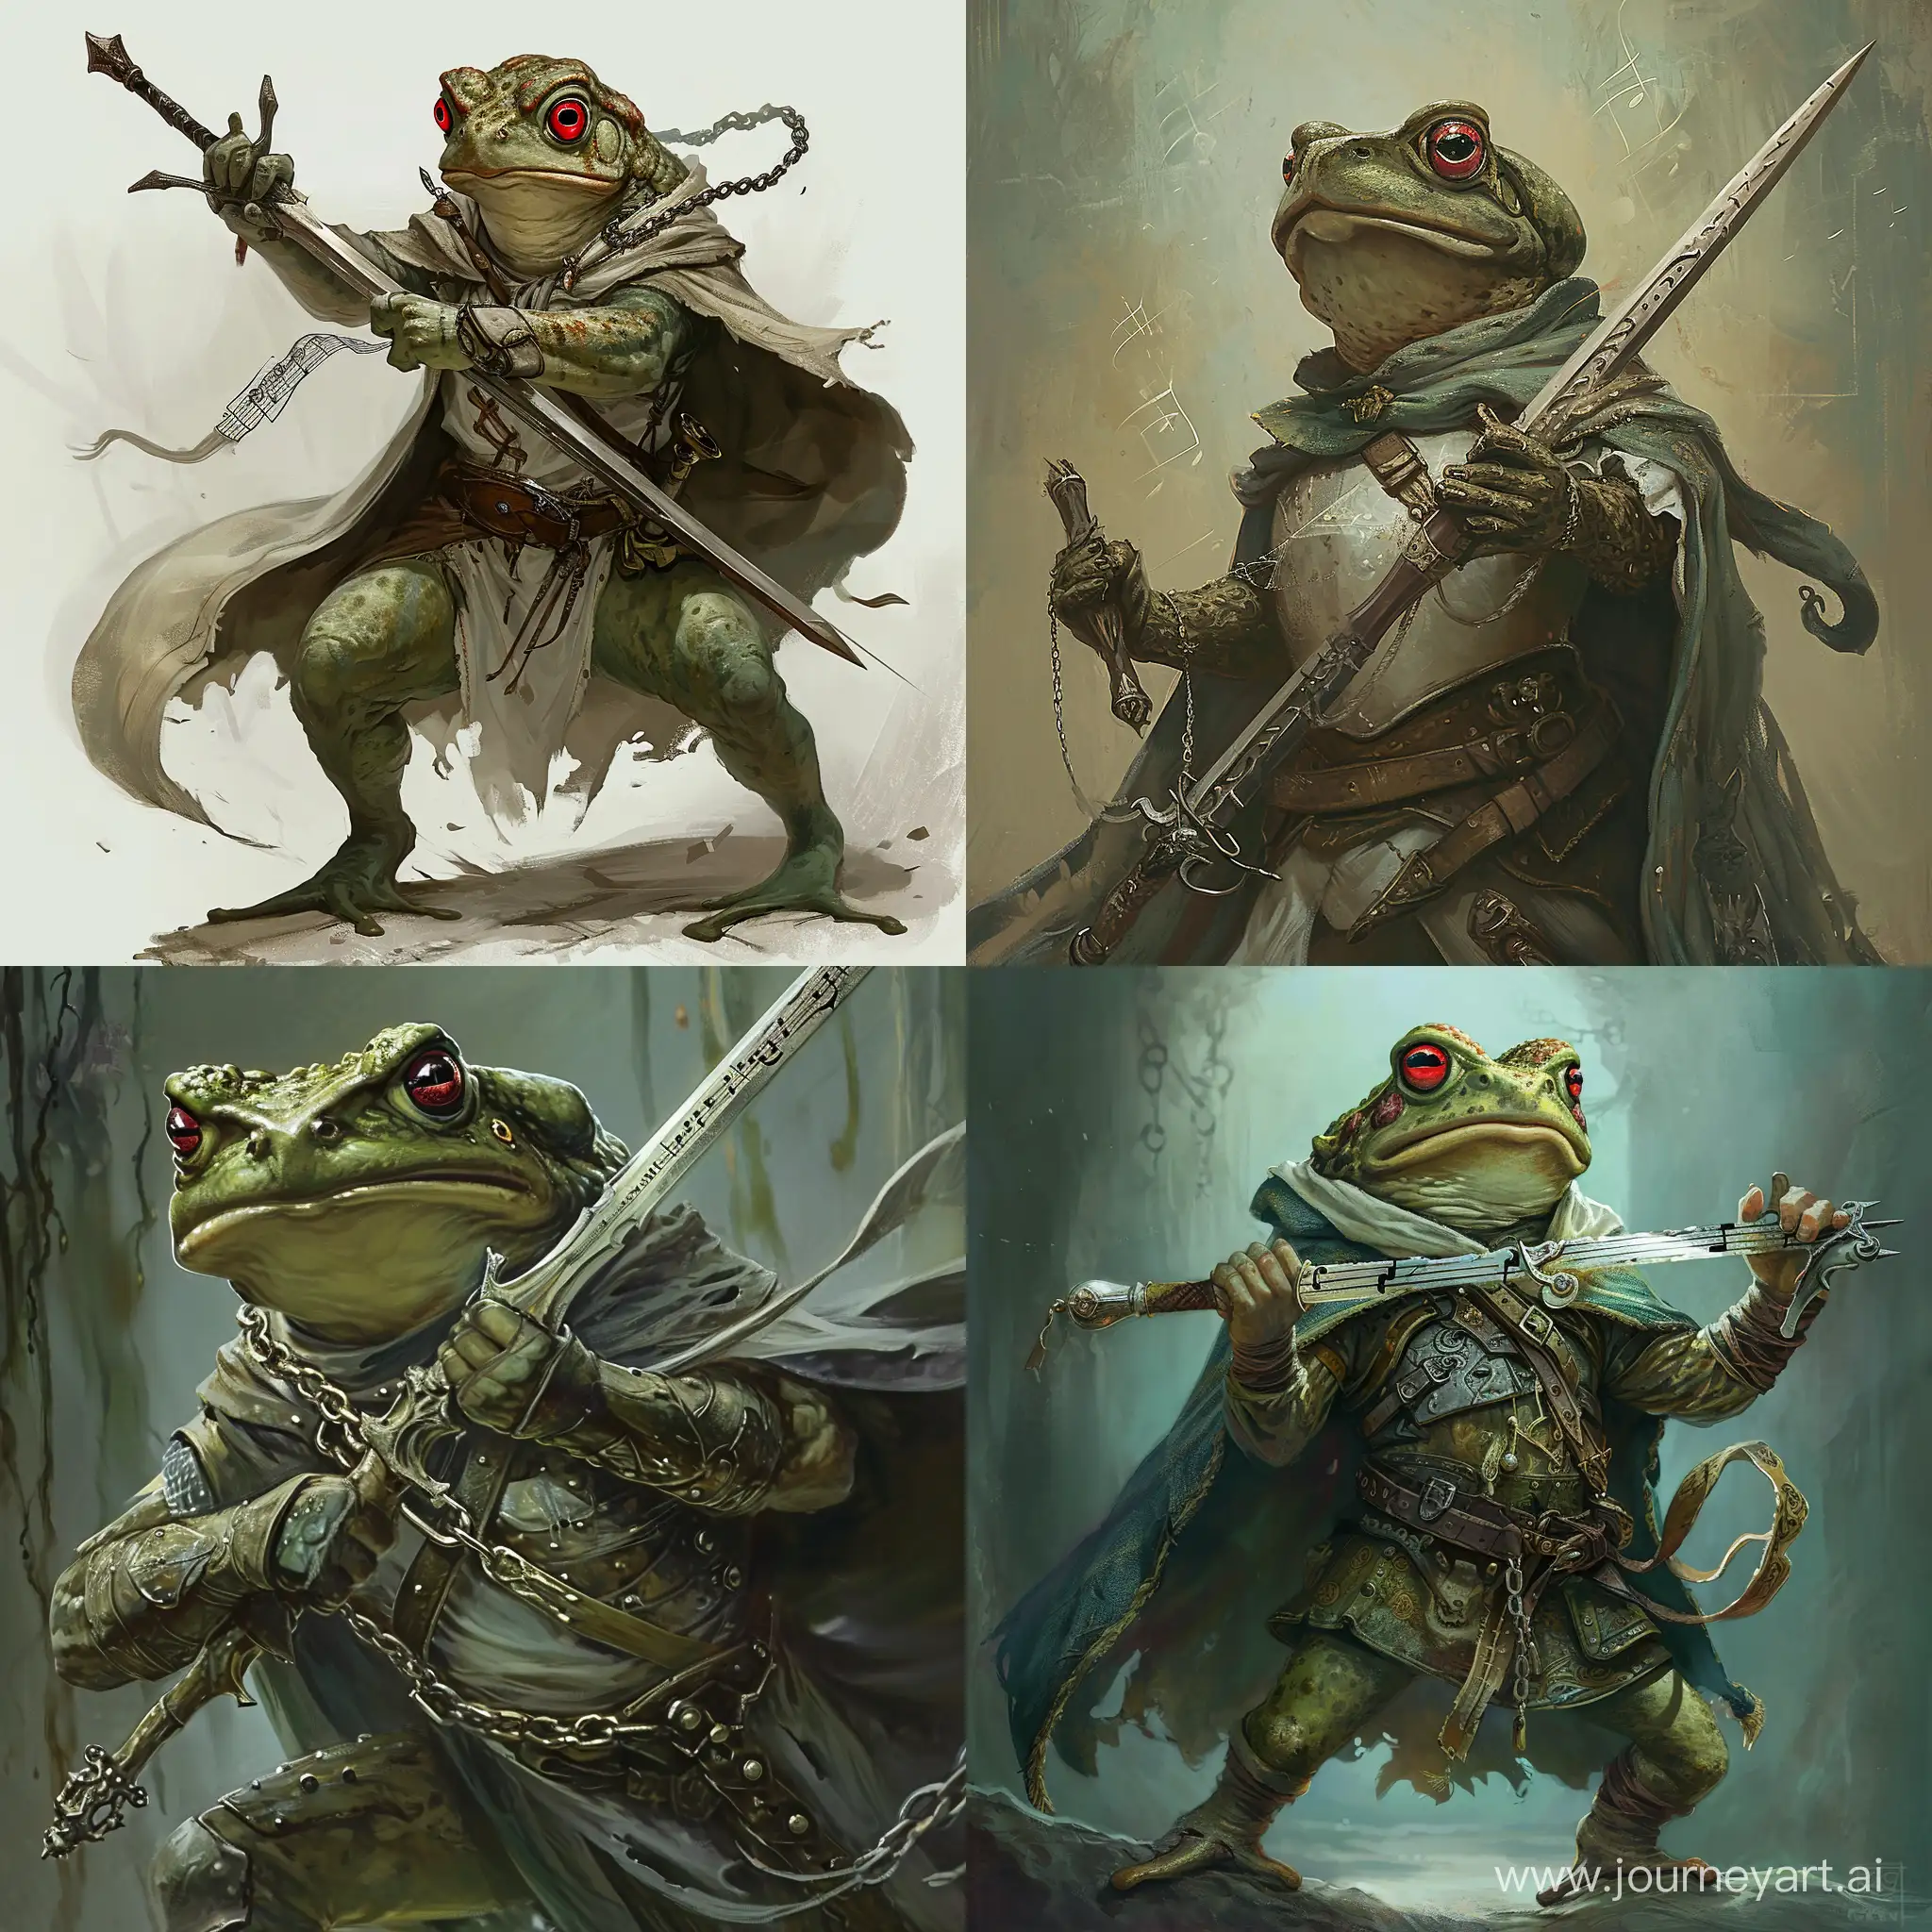 Enchanting-Toad-Bard-with-Extended-Rapier-in-Musical-Combat